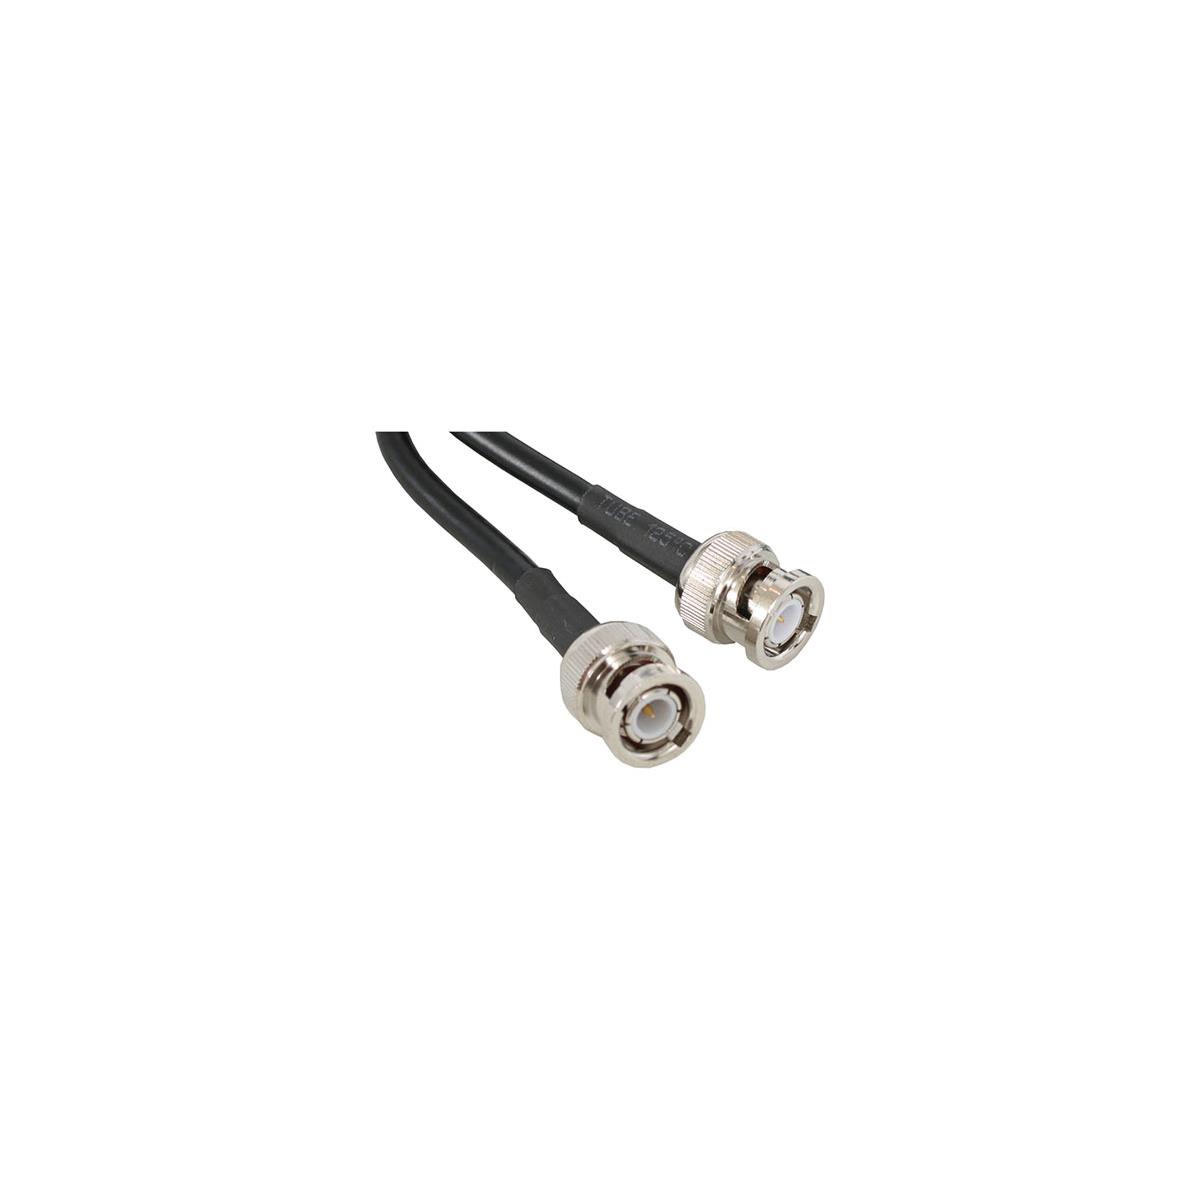 Image of Galaxy Audio 50' BNC Extension Cable for Front Mounting Antenna